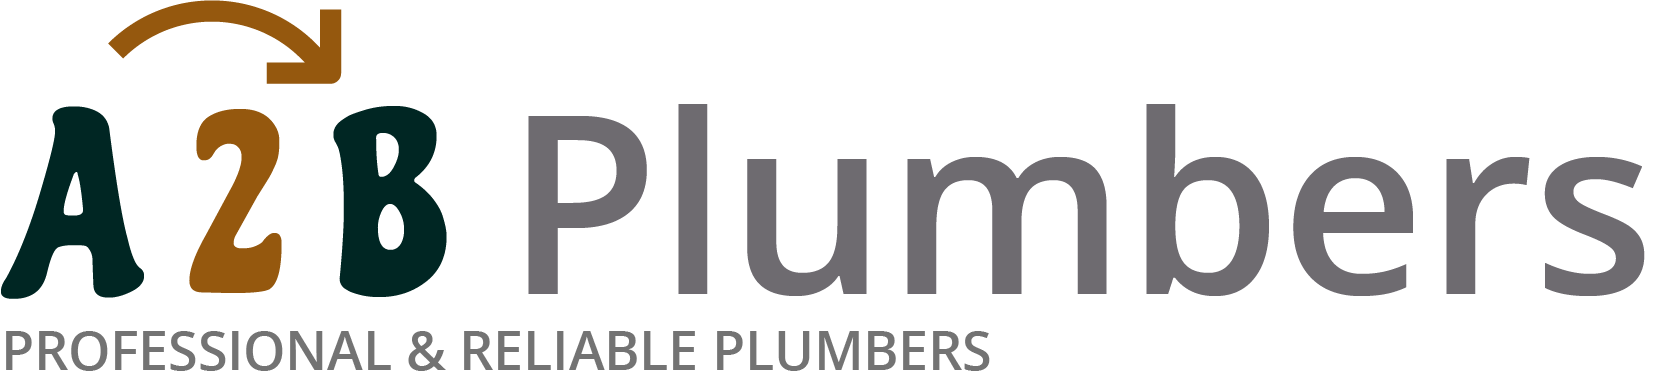 If you need a boiler installed, a radiator repaired or a leaking tap fixed, call us now - we provide services for properties in Coulsdon and the local area.